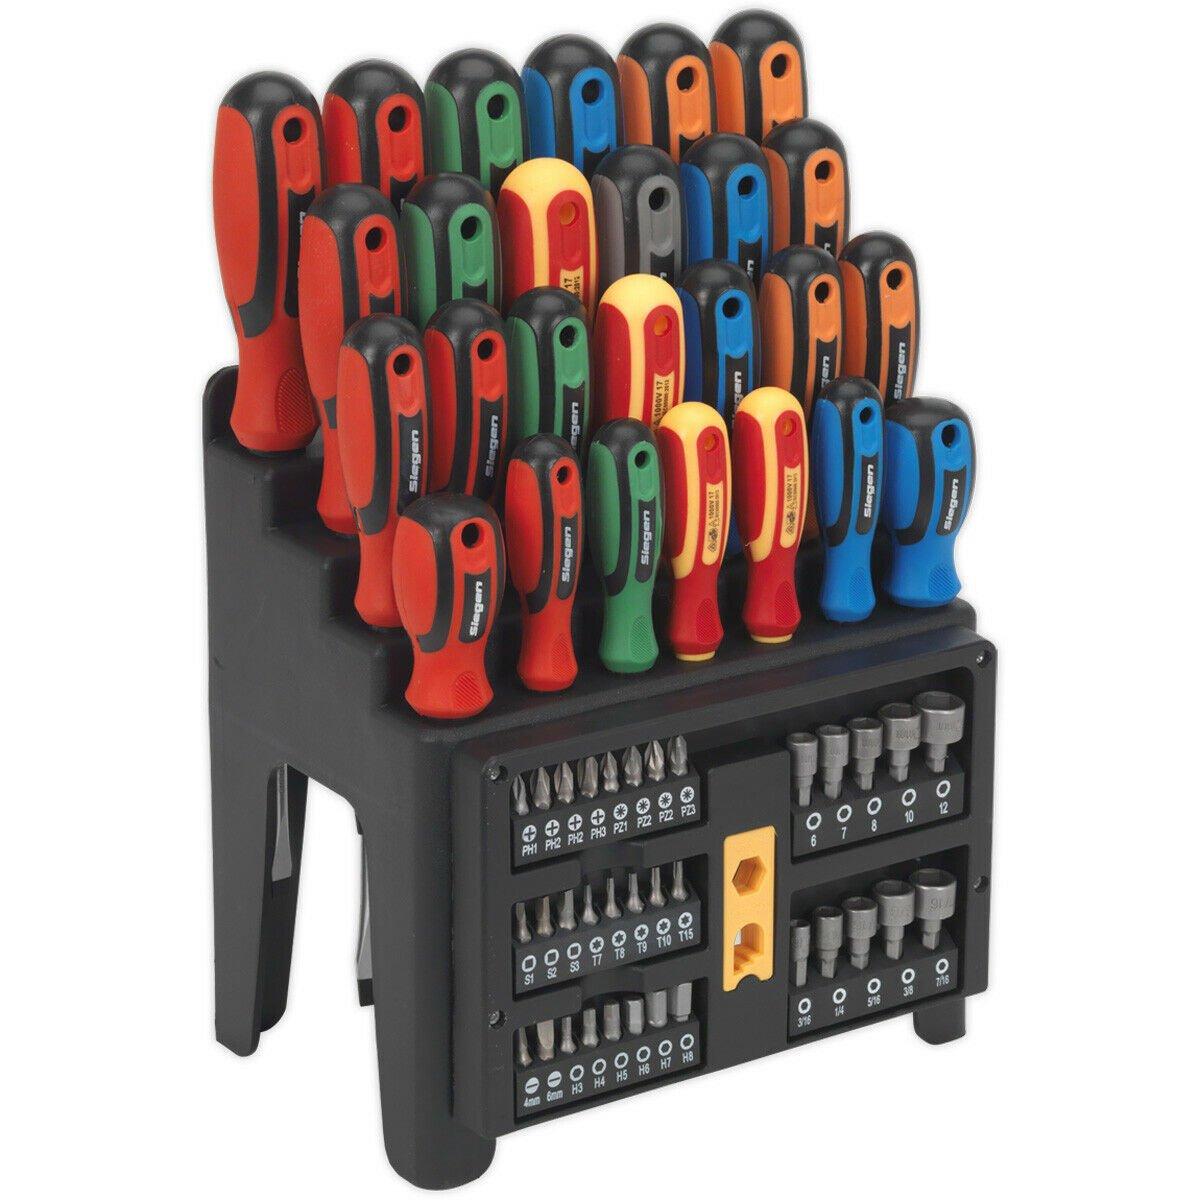 61 PACK - Large Screwdriver Nut Driver & Bit Set - Colour Coded & Storage Stand